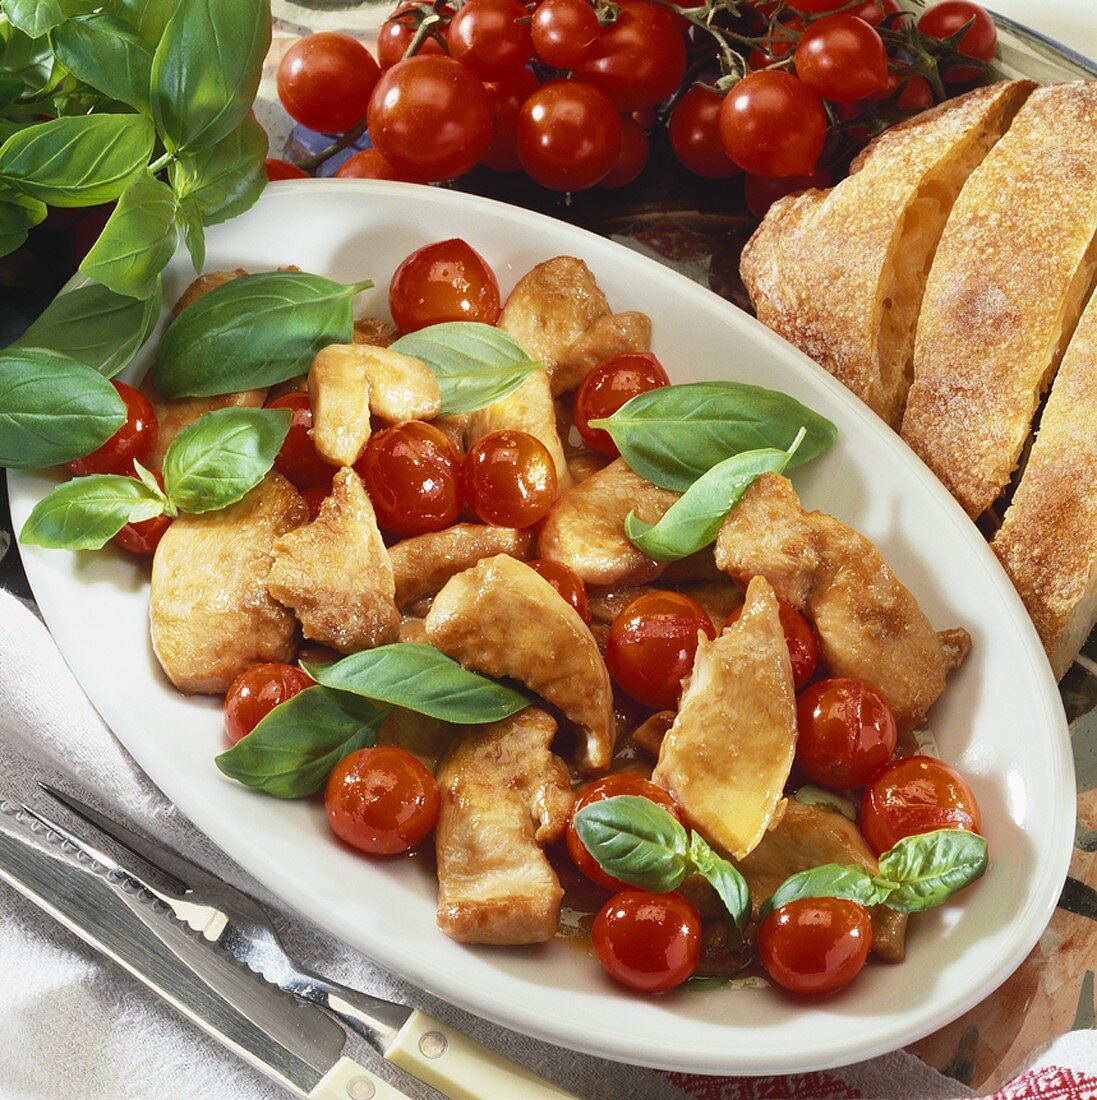 Pan-fried chicken with glazed cherry tomatoes